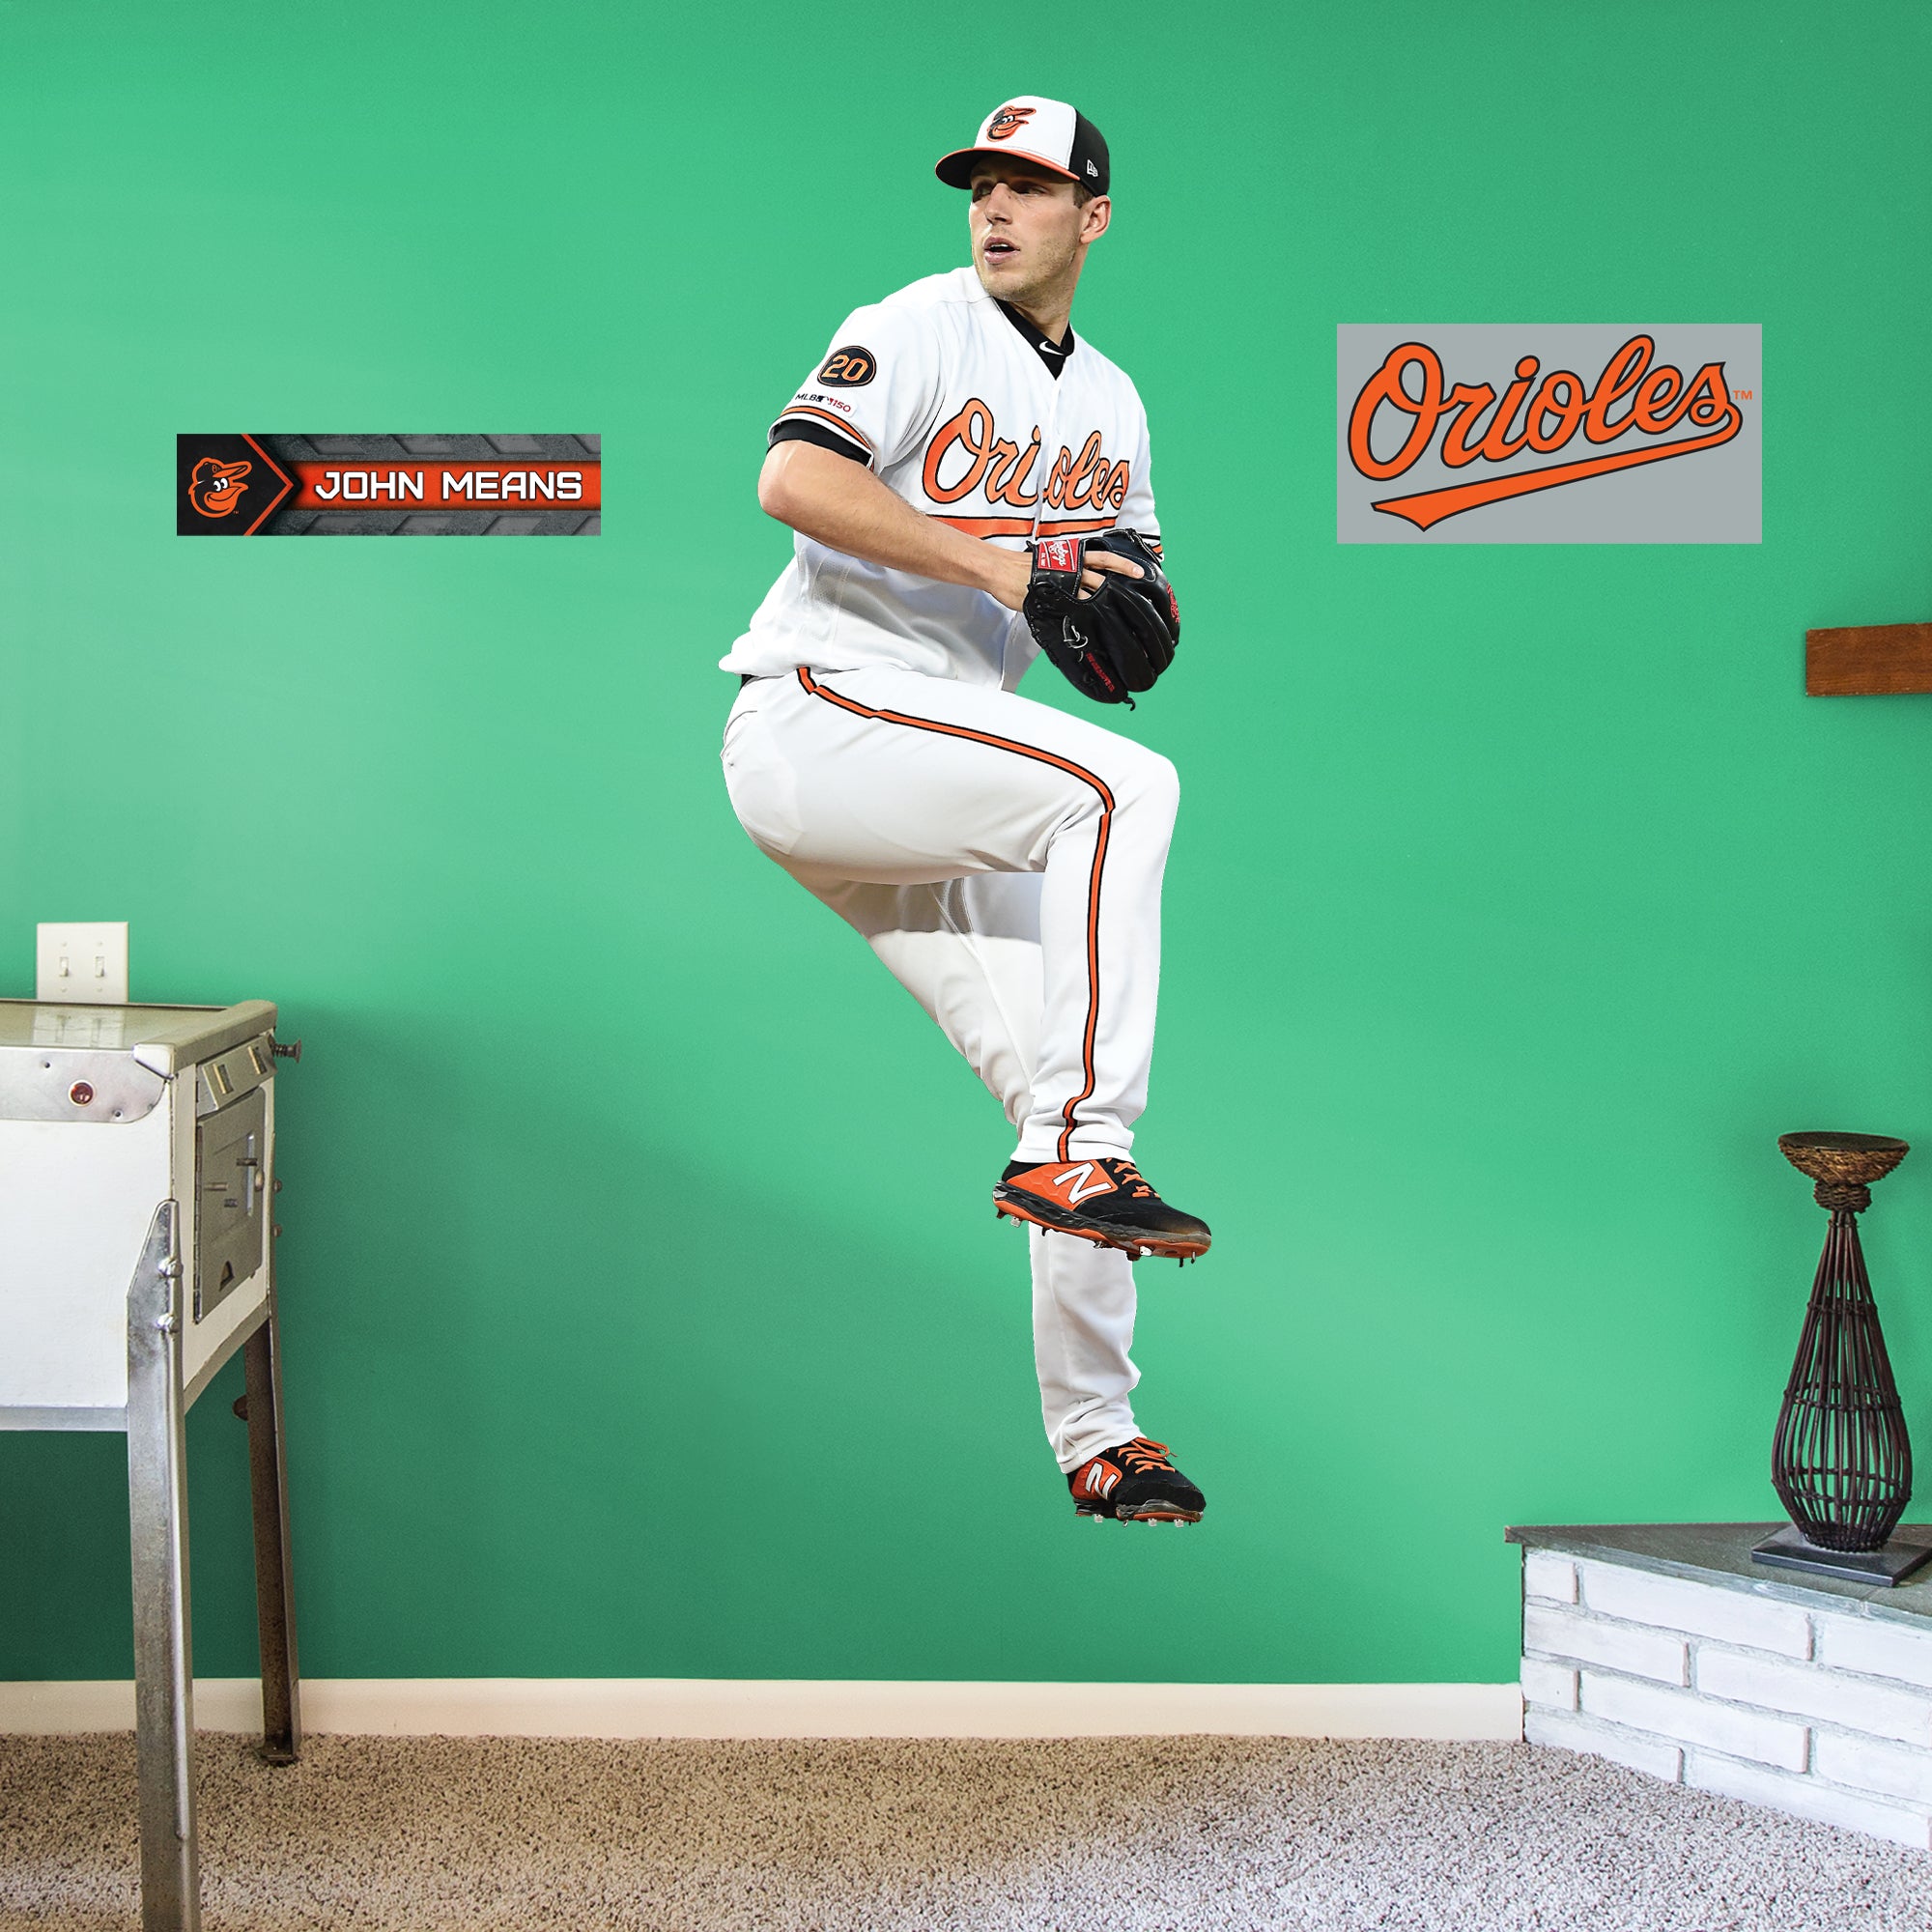 John Means for Baltimore Orioles - Officially Licensed MLB Removable Wall Decal Life-Size Athlete + 2 Decals by Fathead | Vinyl